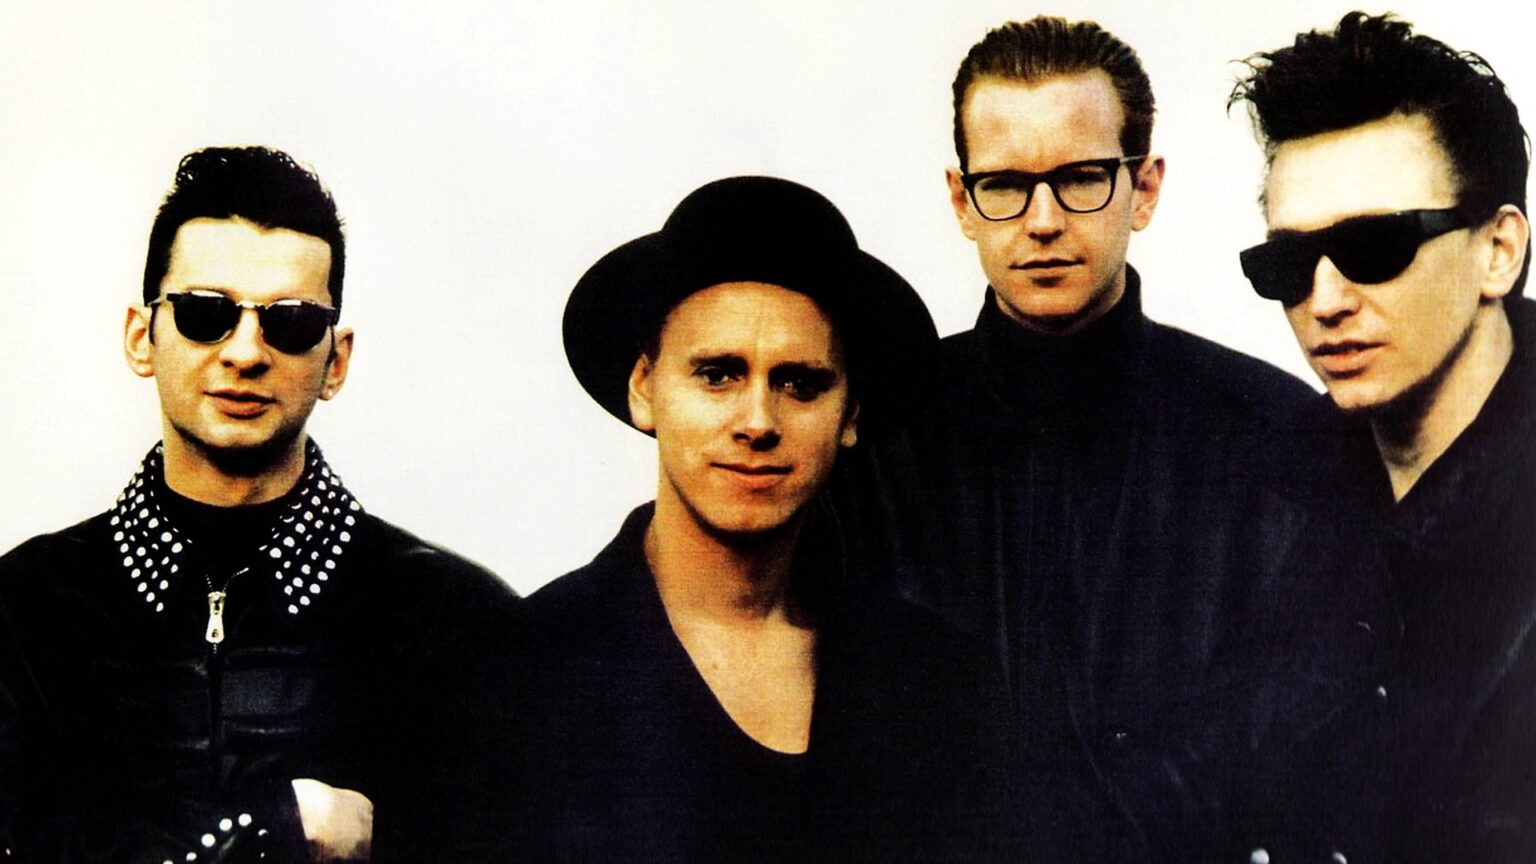 Never Let Me Down Again: The Story Behind Depeche Mode's Classic